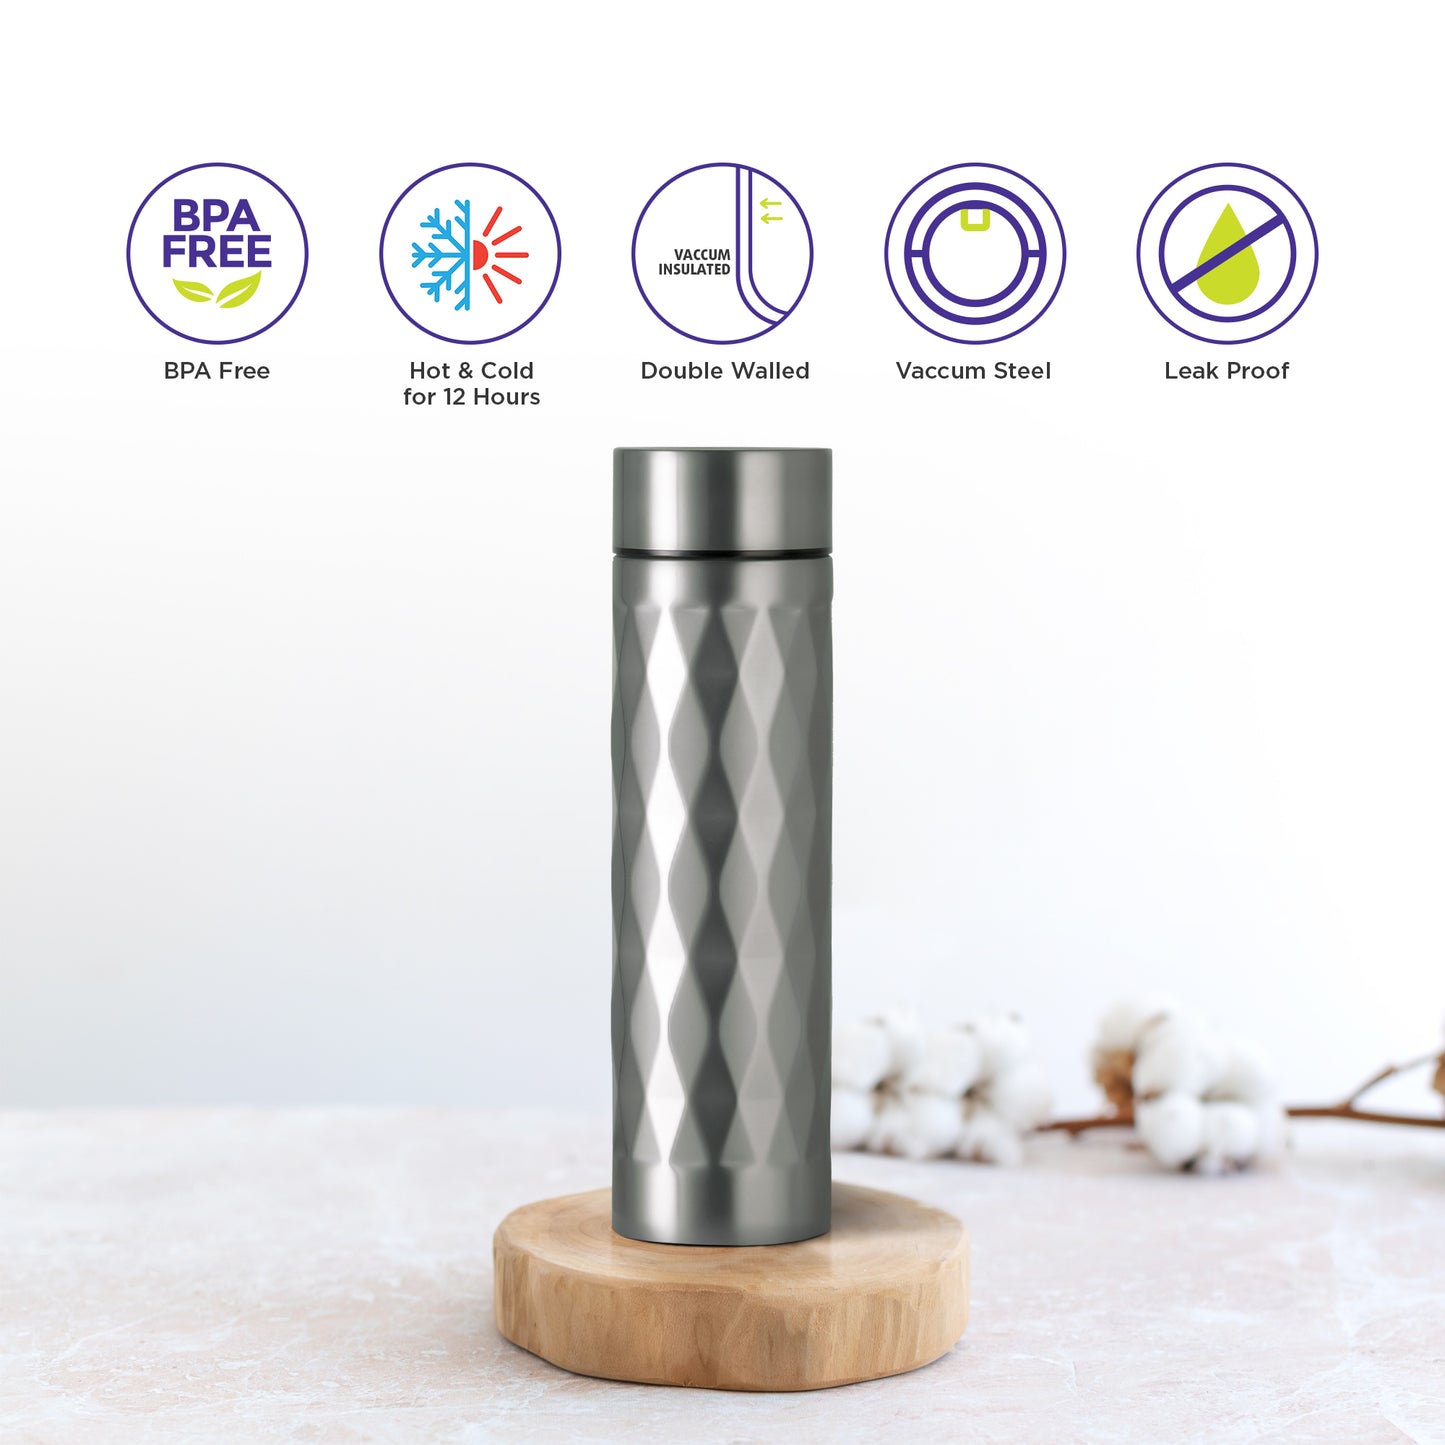 Selvel Prism Thermos Flask Vacuum Insulated Bottle (500 Ml - Silver)